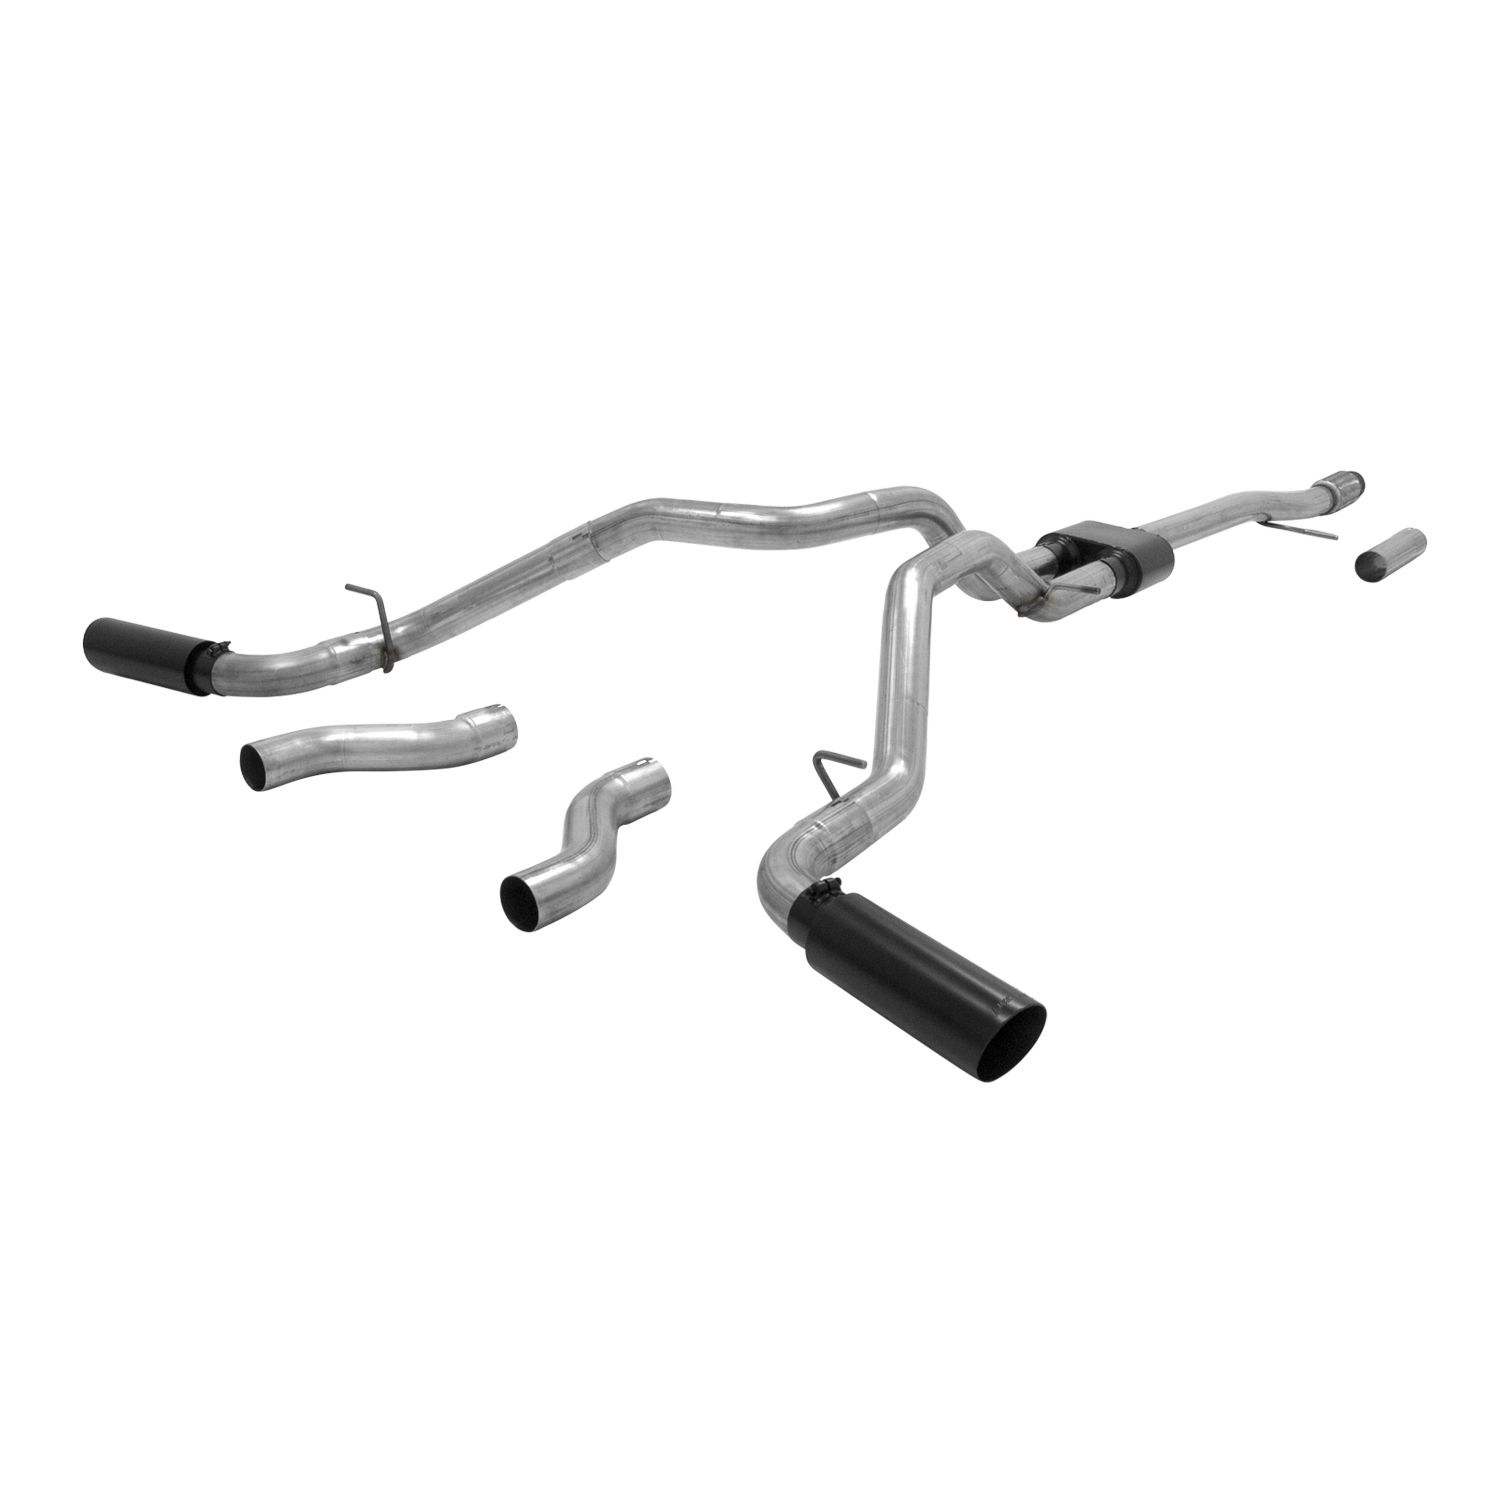 2014 GMC Sierra 1500 5.3L 4DR EXT Cab Flowmaster Outlaw Cat-Back Exhaust - 817689